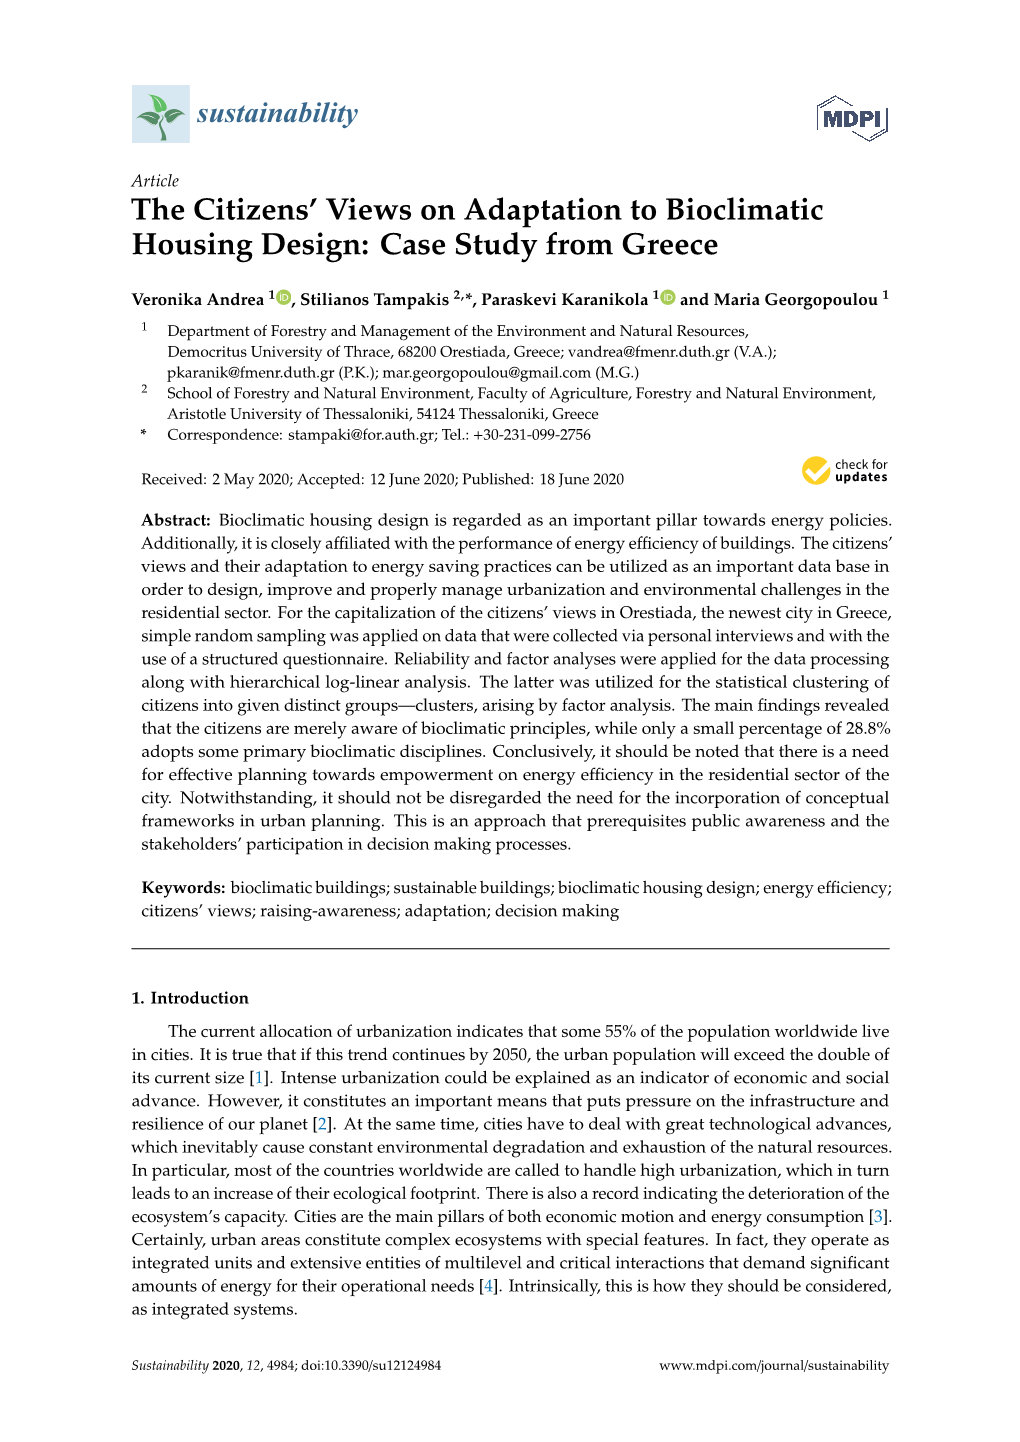 The Citizens' Views on Adaptation to Bioclimatic Housing Design